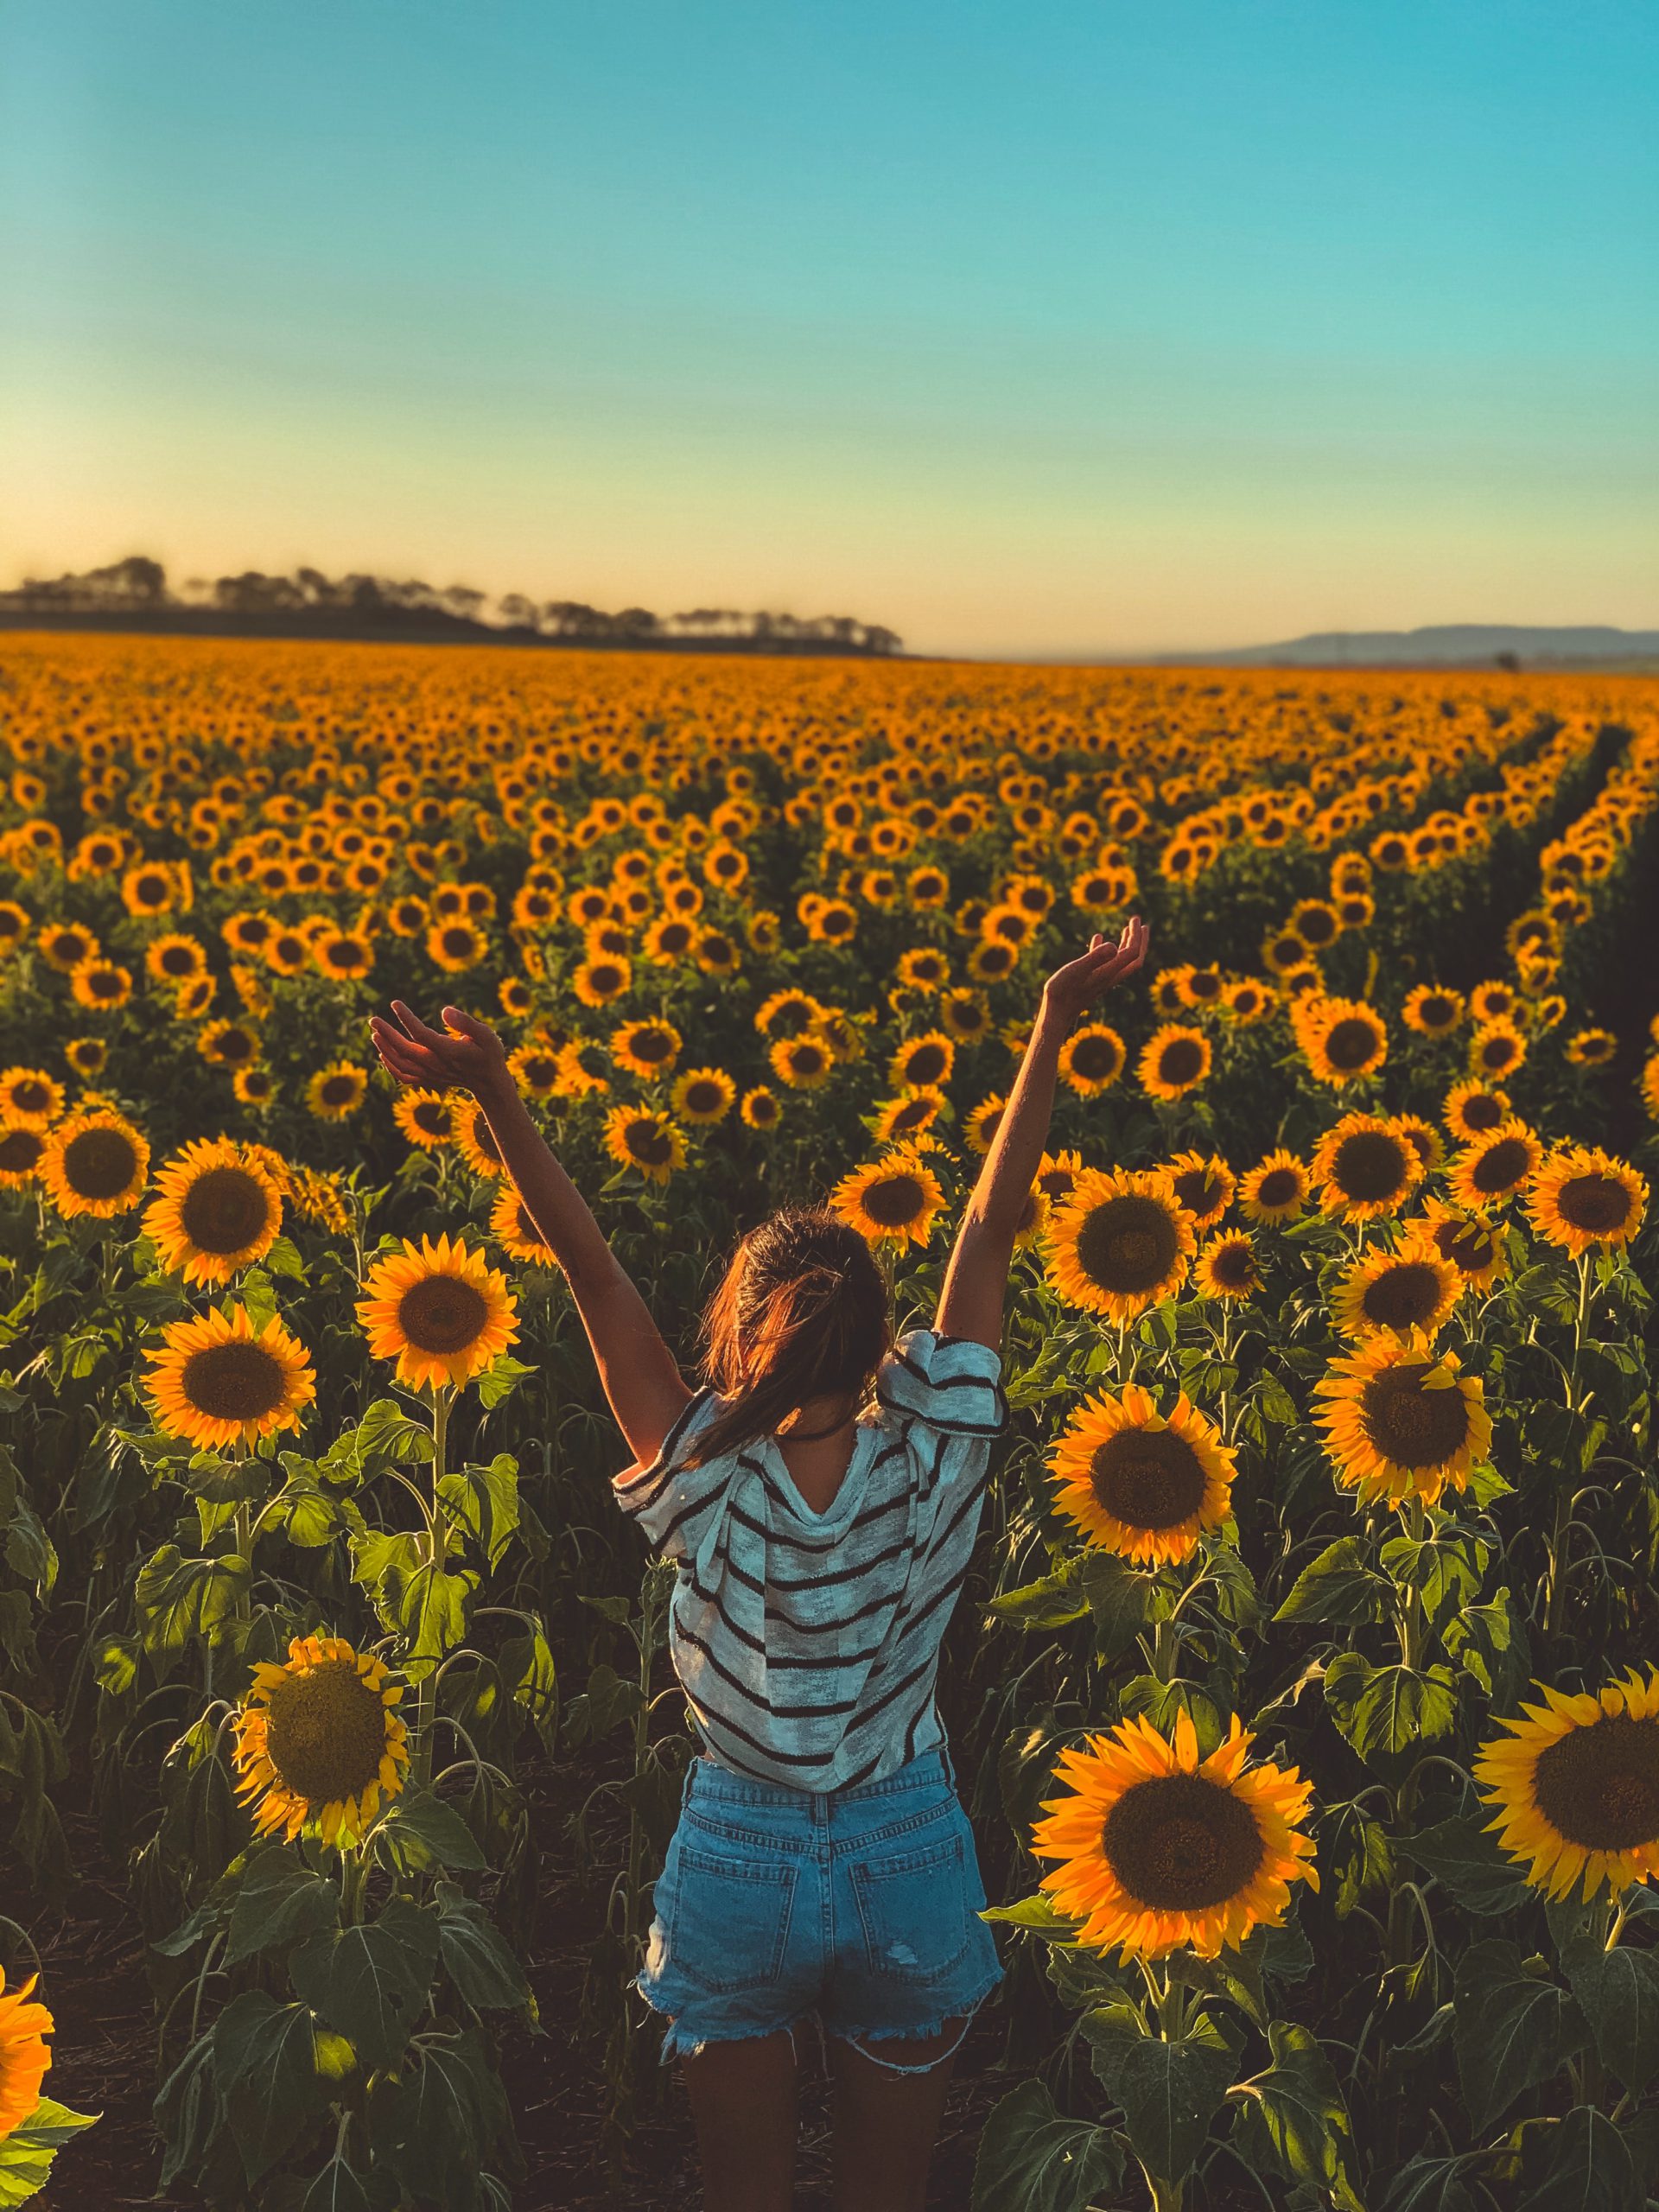 Sunflower crops for tourist selfies